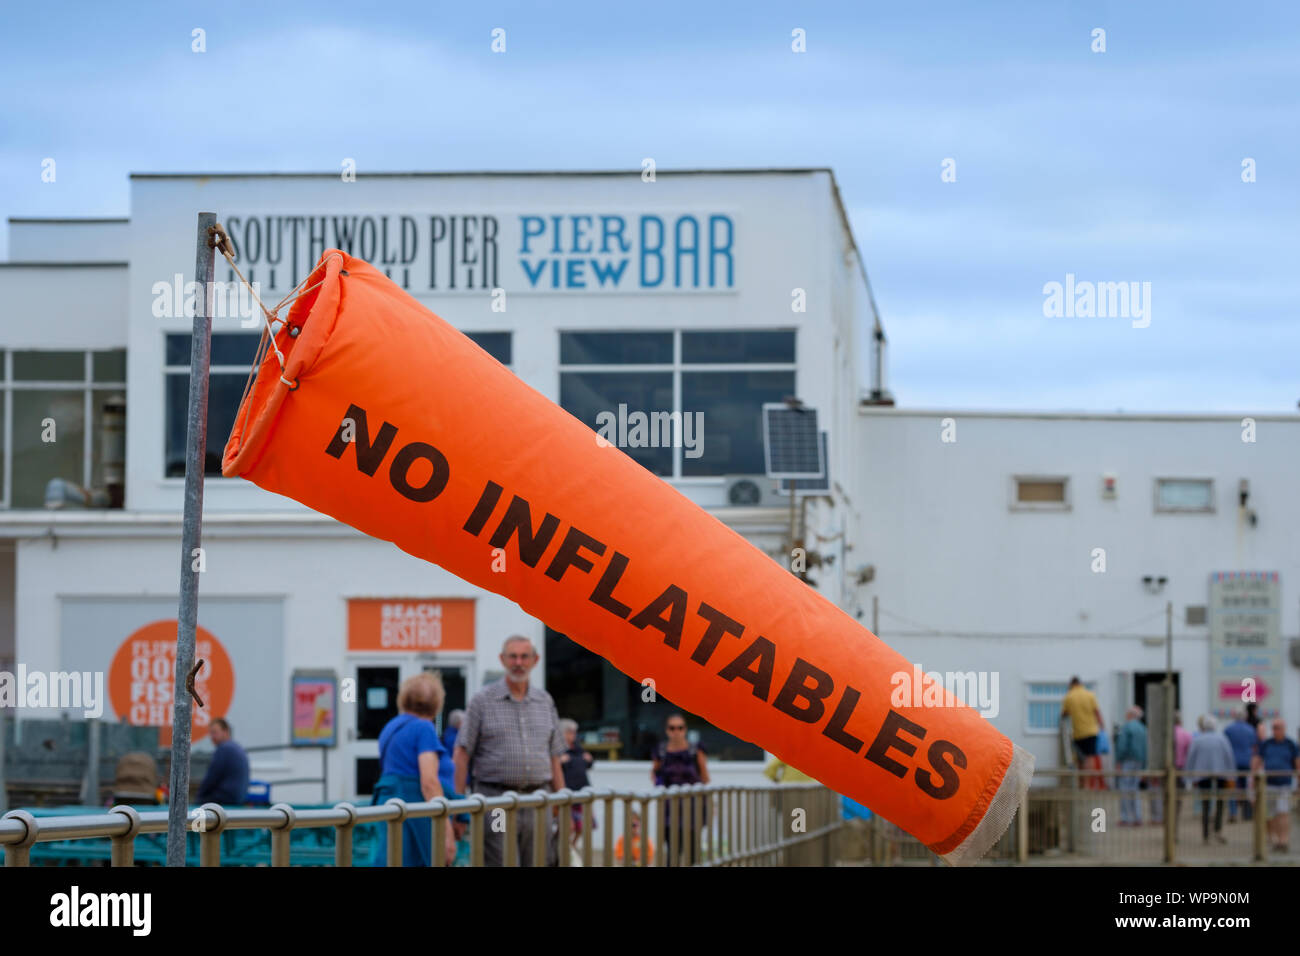 A windsock at the seaside warning not to use inflatables. Stock Photo